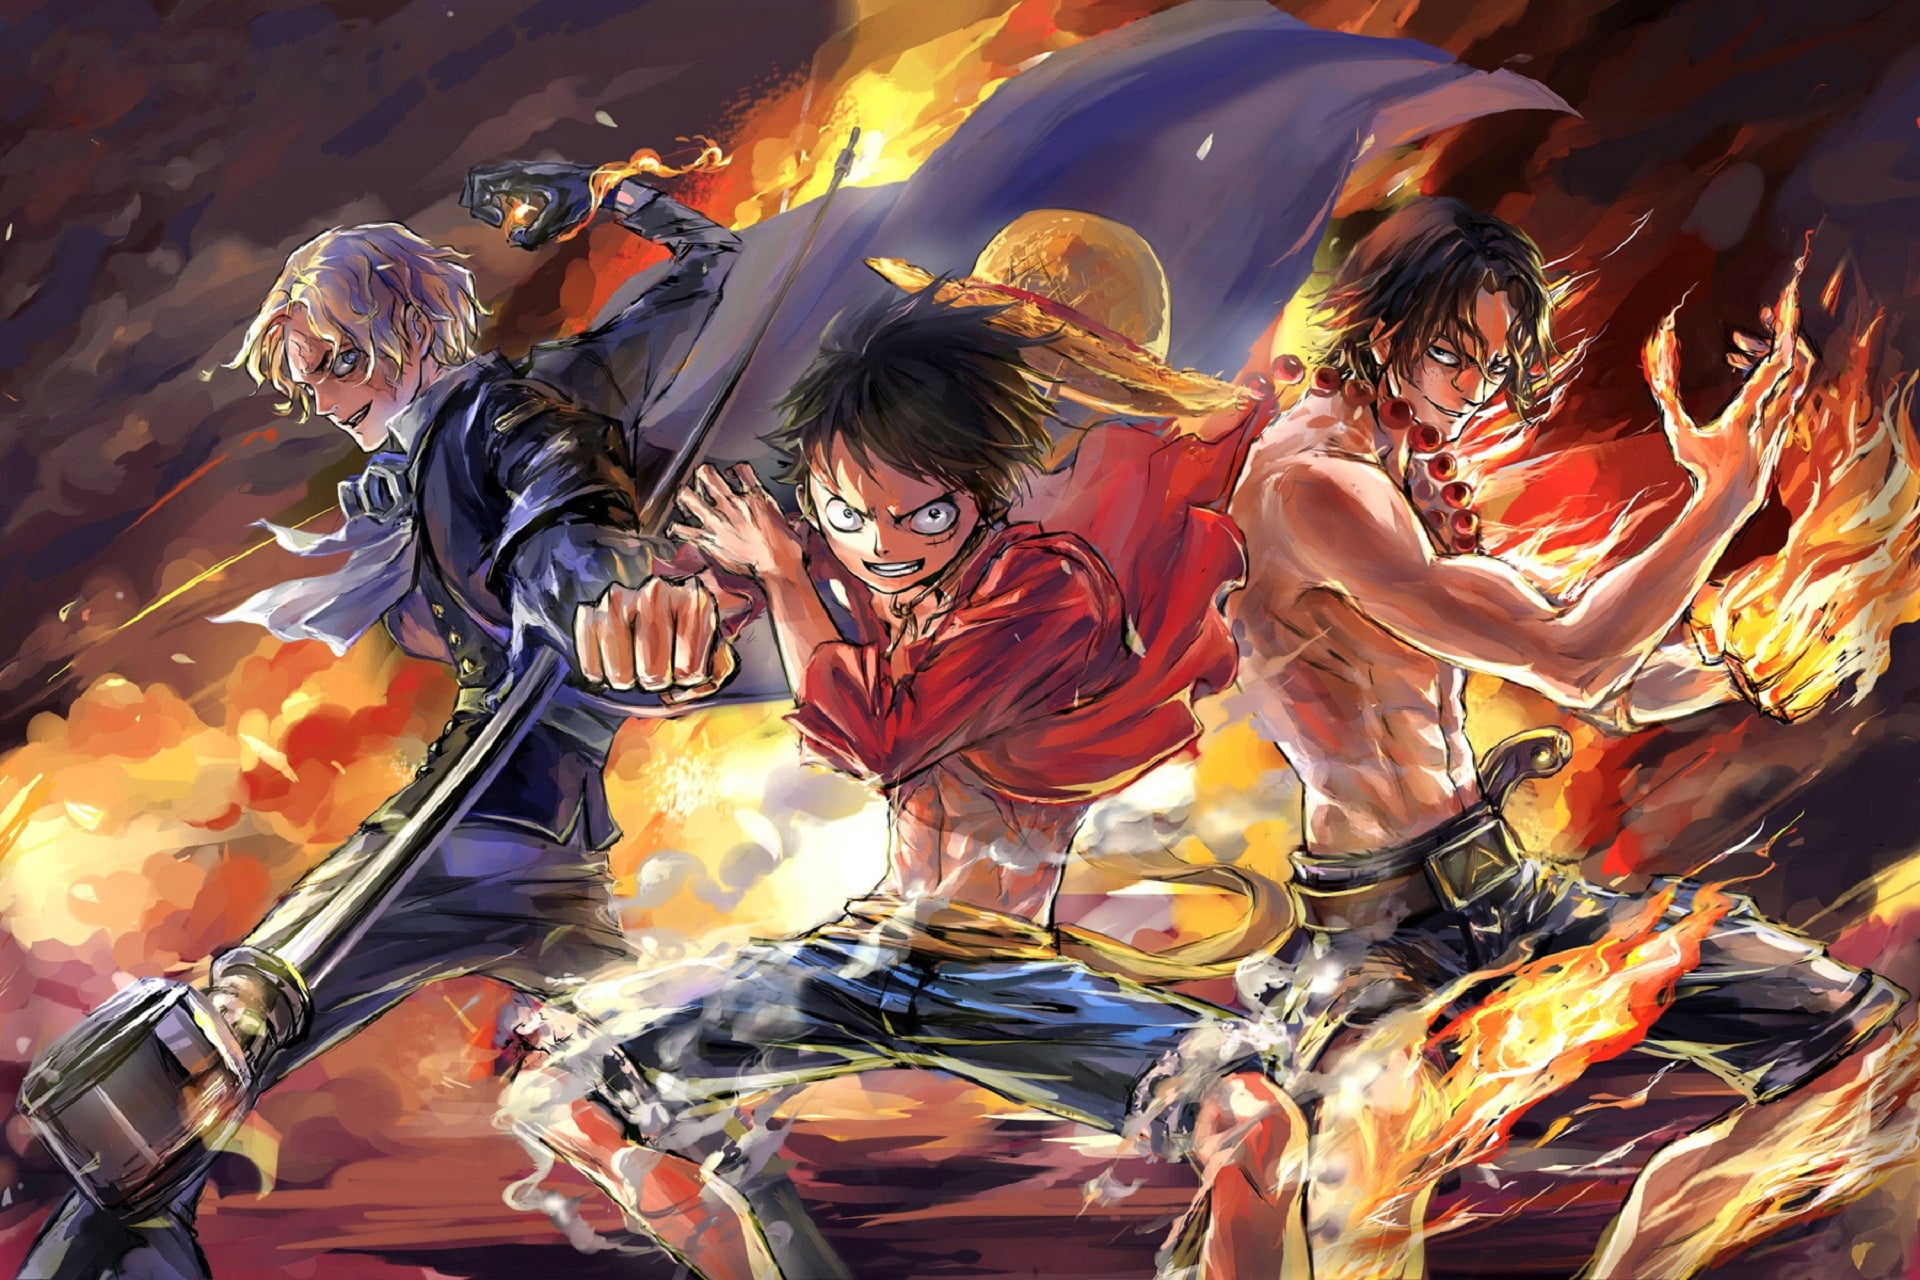 Luffy, Ace and Sabo One Piece Team Wallpaper, HD Anime 4K ...